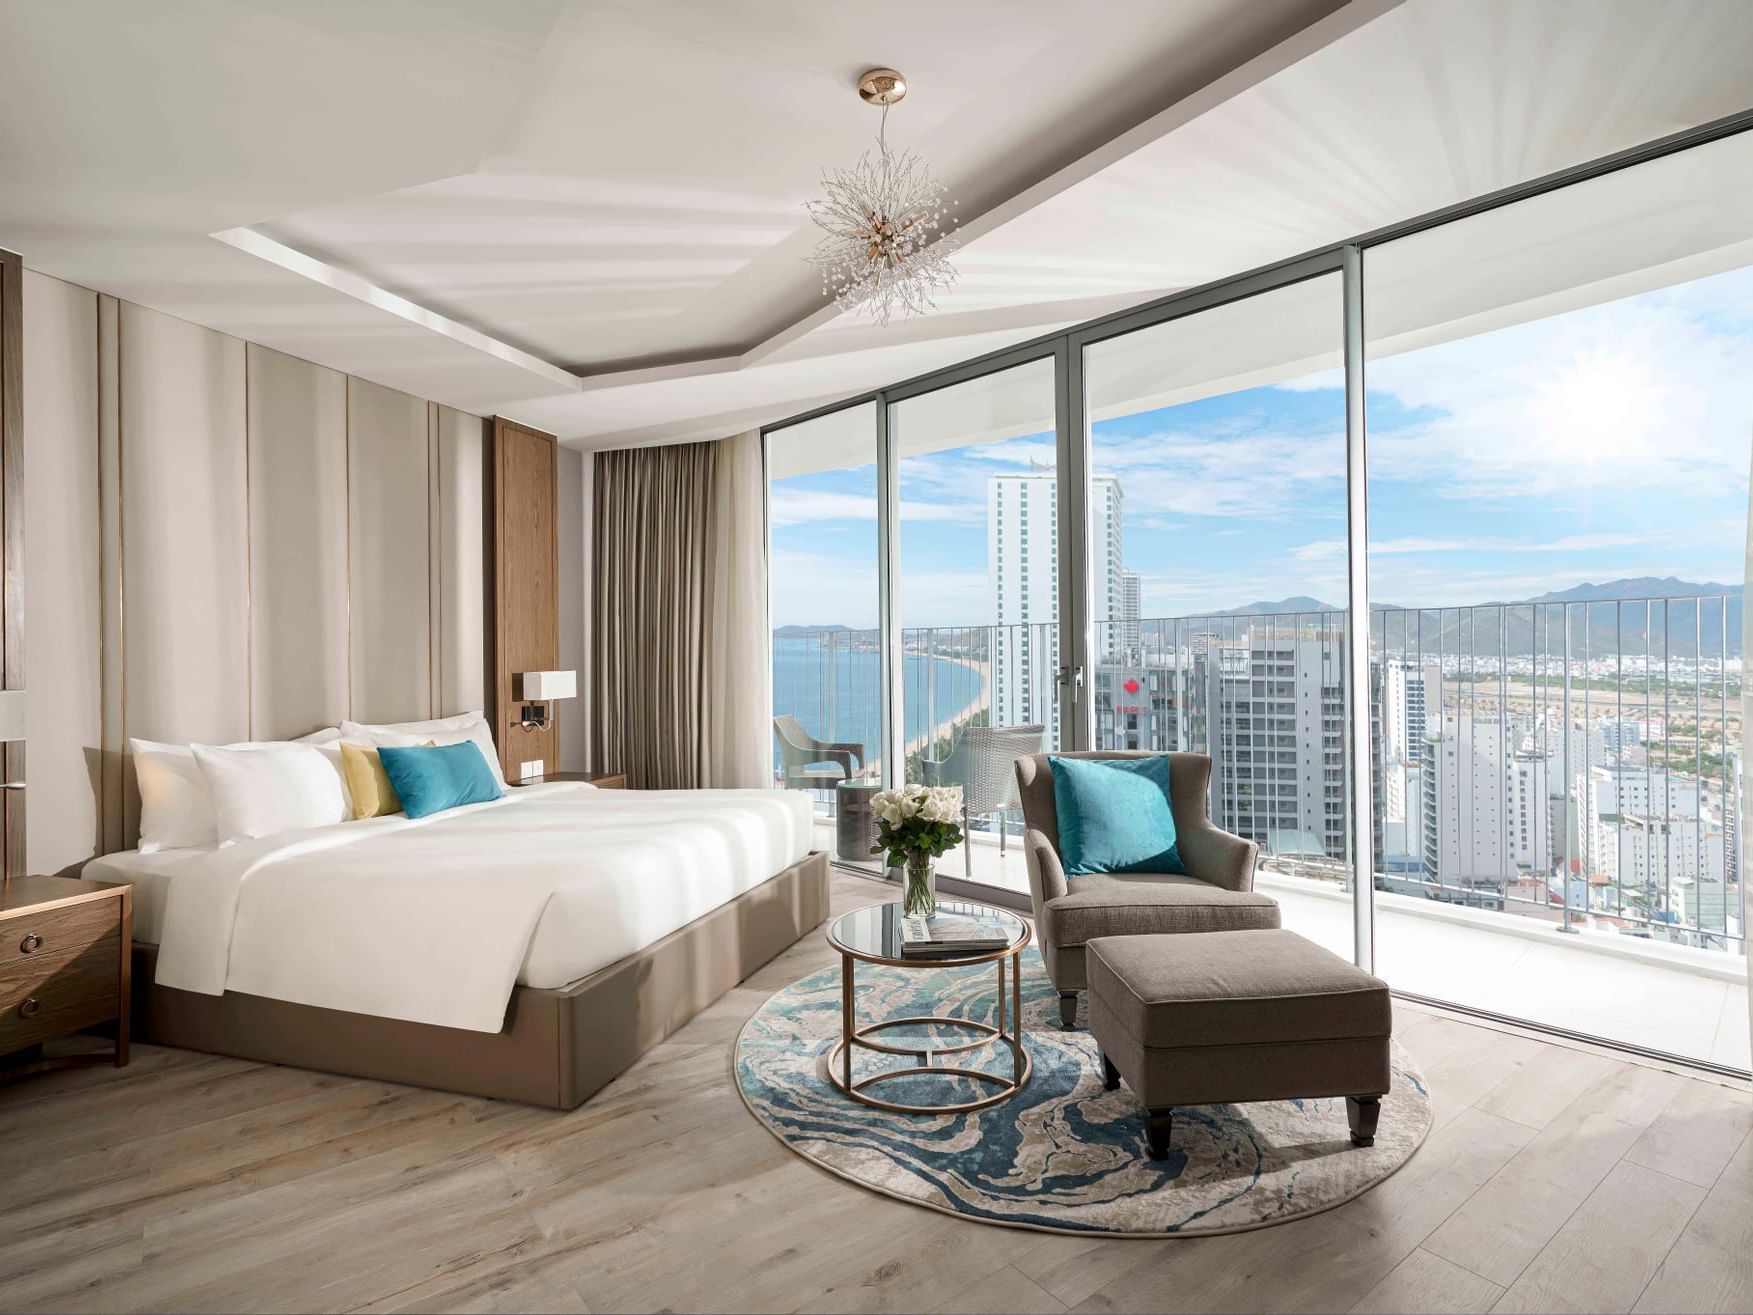 Interior of Executive Sky Room with a city view at Eastin Hotel